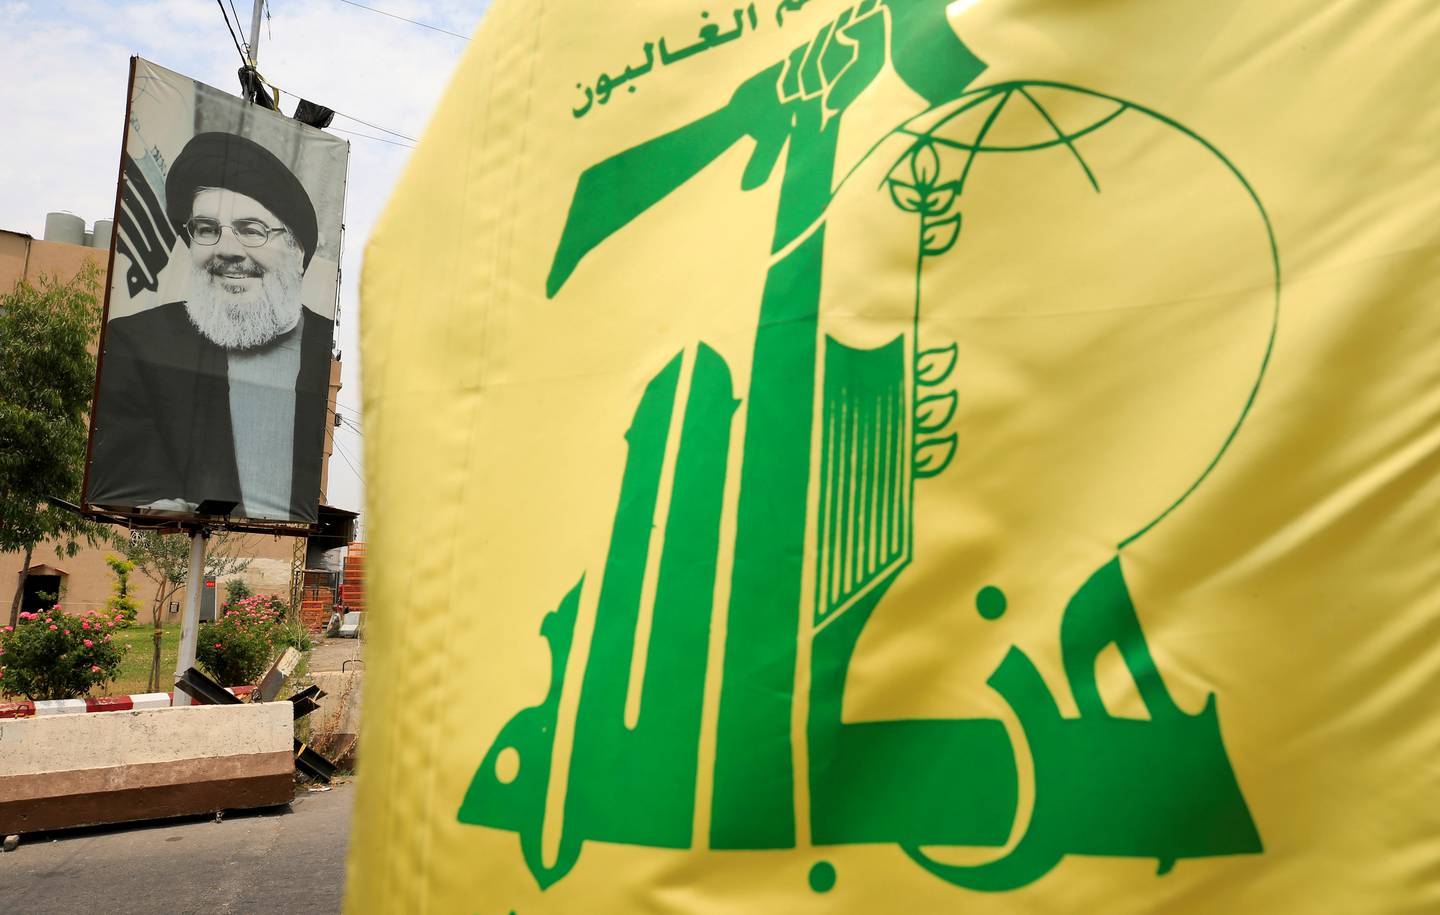 Security sources say Hezbollah has established itself as a main partner for Captagon production and smuggling in Syria. Reuters